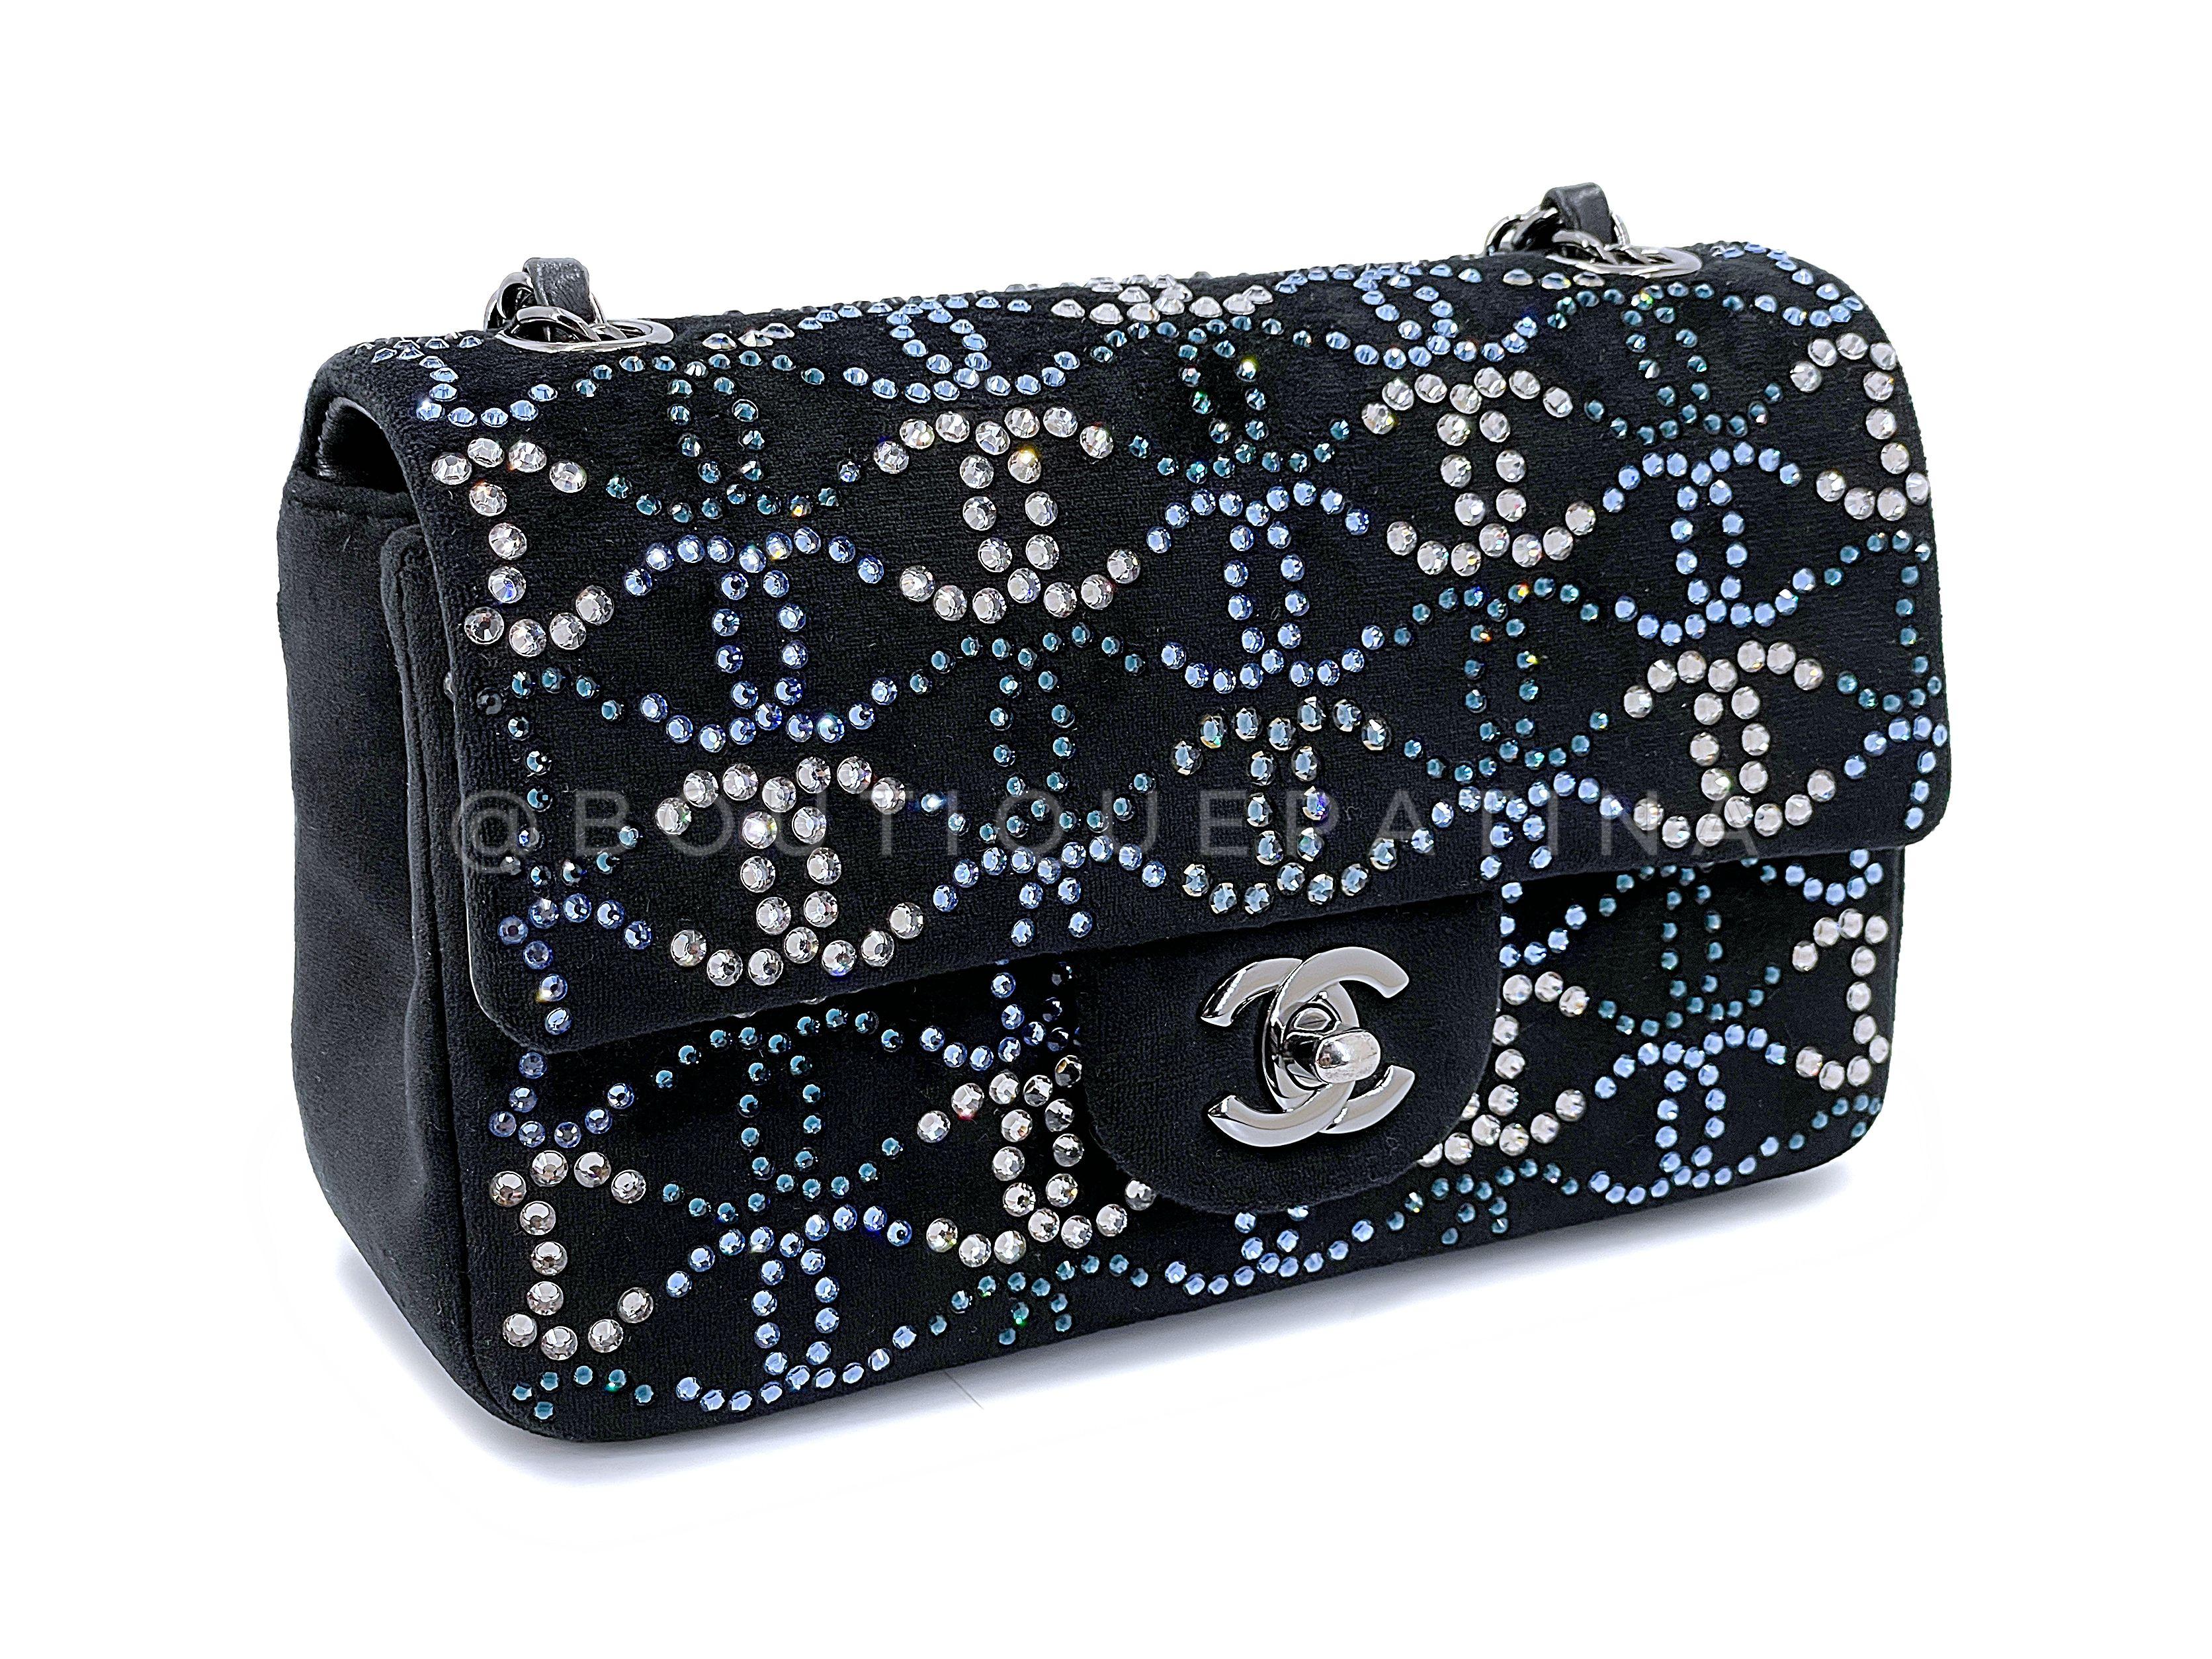 Chanel Crystal CC Embellished Rectangular Mini Flap Dark Navy Velvet RHW 67652 In Excellent Condition For Sale In Costa Mesa, CA